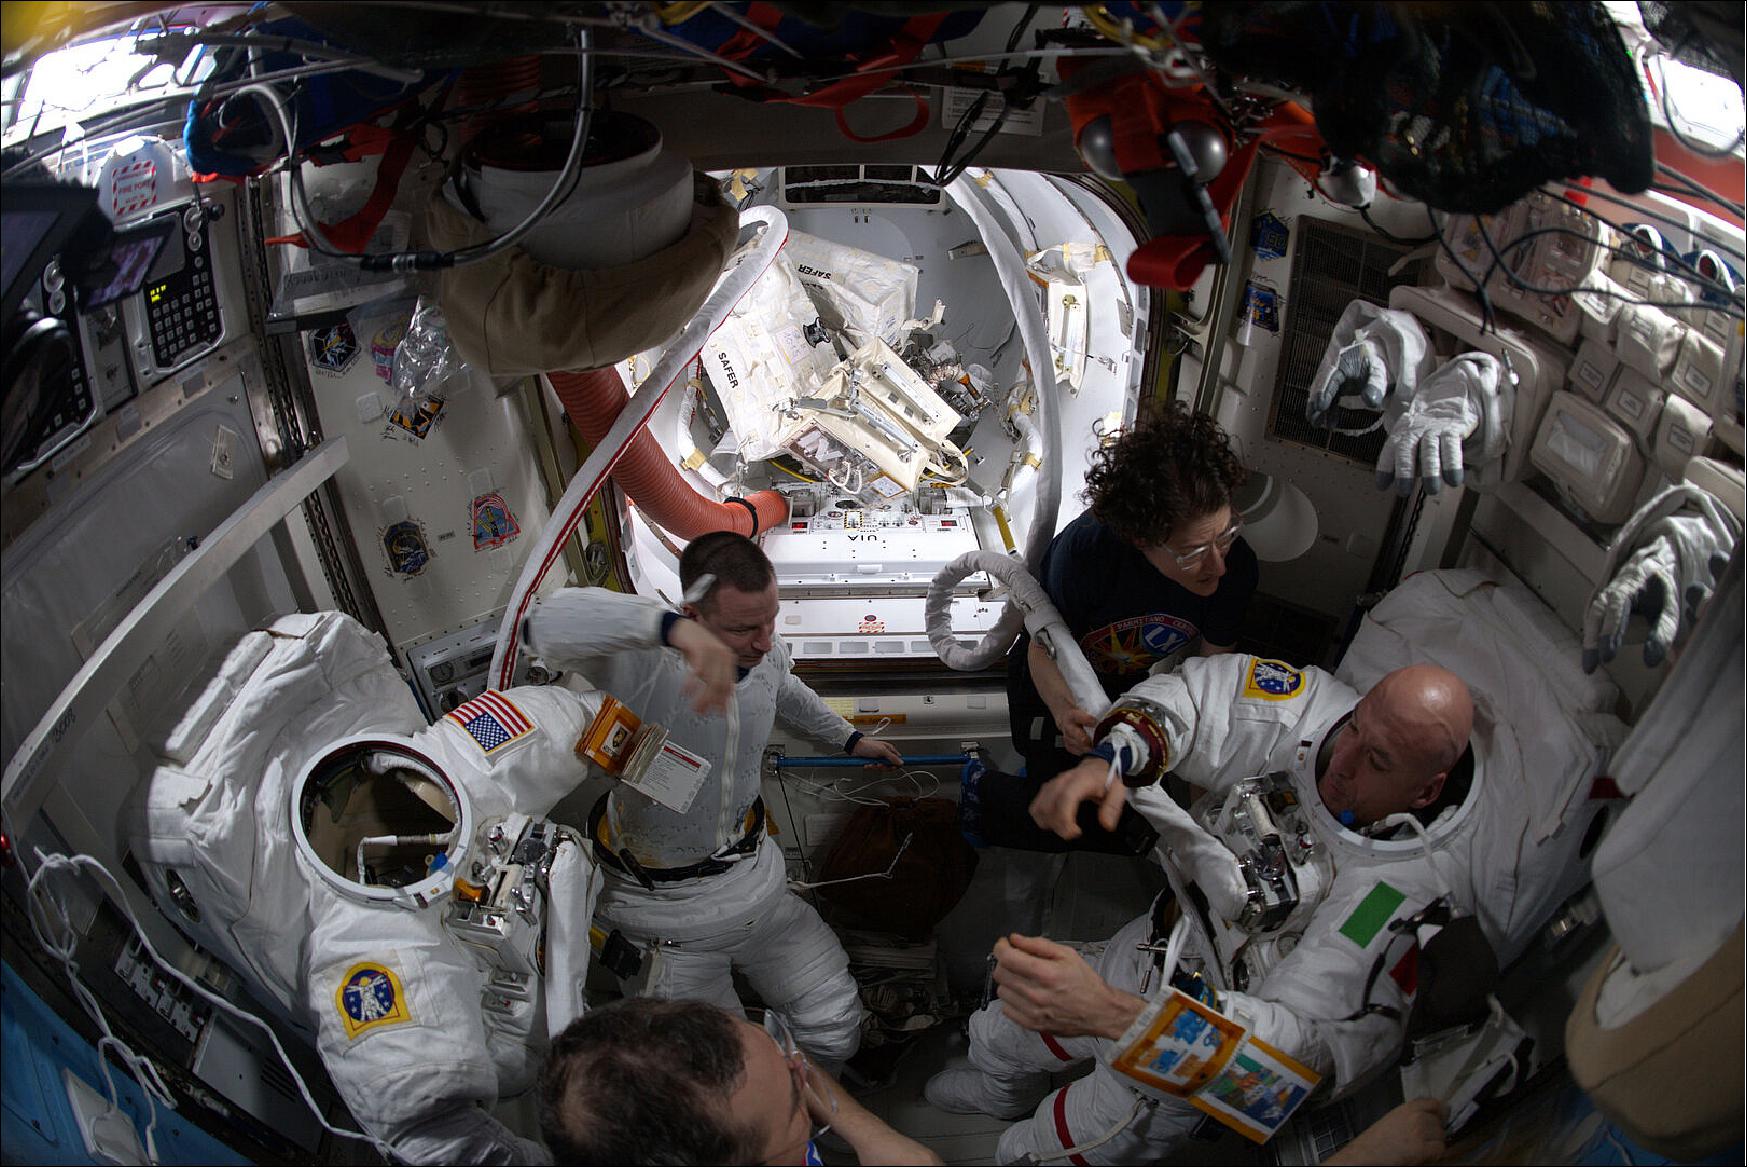 Figure 15: ESA astronaut Luca Parmitano and NASA astronaut Andrew Morgan are helped into their American EMU (Extravehicular Mobility Unit) spacesuits by NASA astronaut Christina Koch and Russian cosmonaut Oleg Skripochka ahead of the second spacewalk to service AMS-02 (image credit: ESA/NASA)